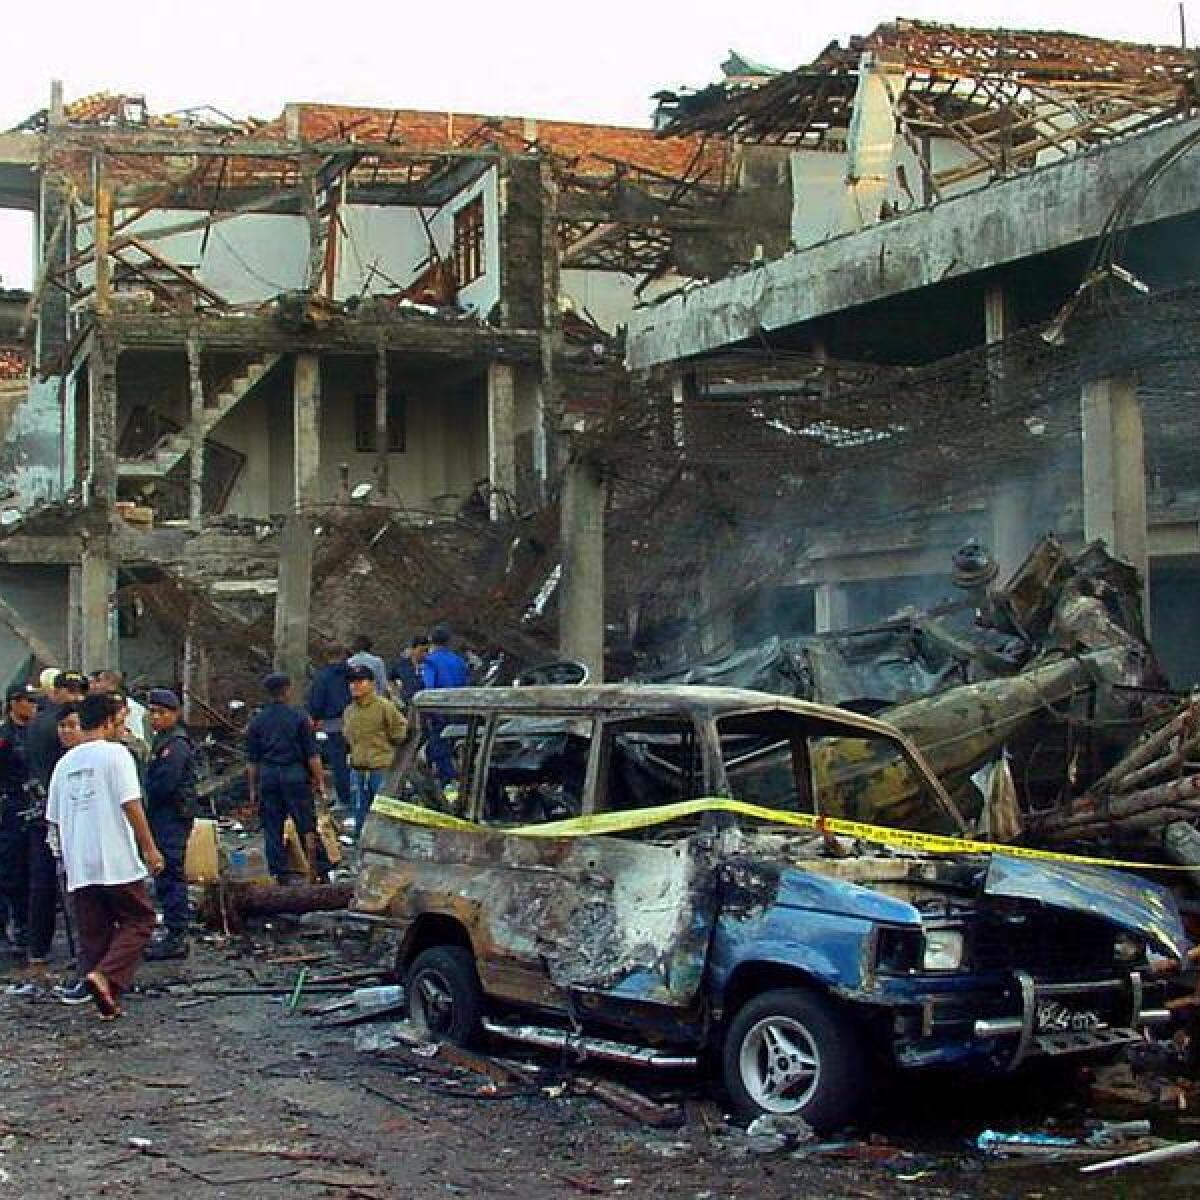 Police inspect the ruins of a Kuta nightclub in October 2002